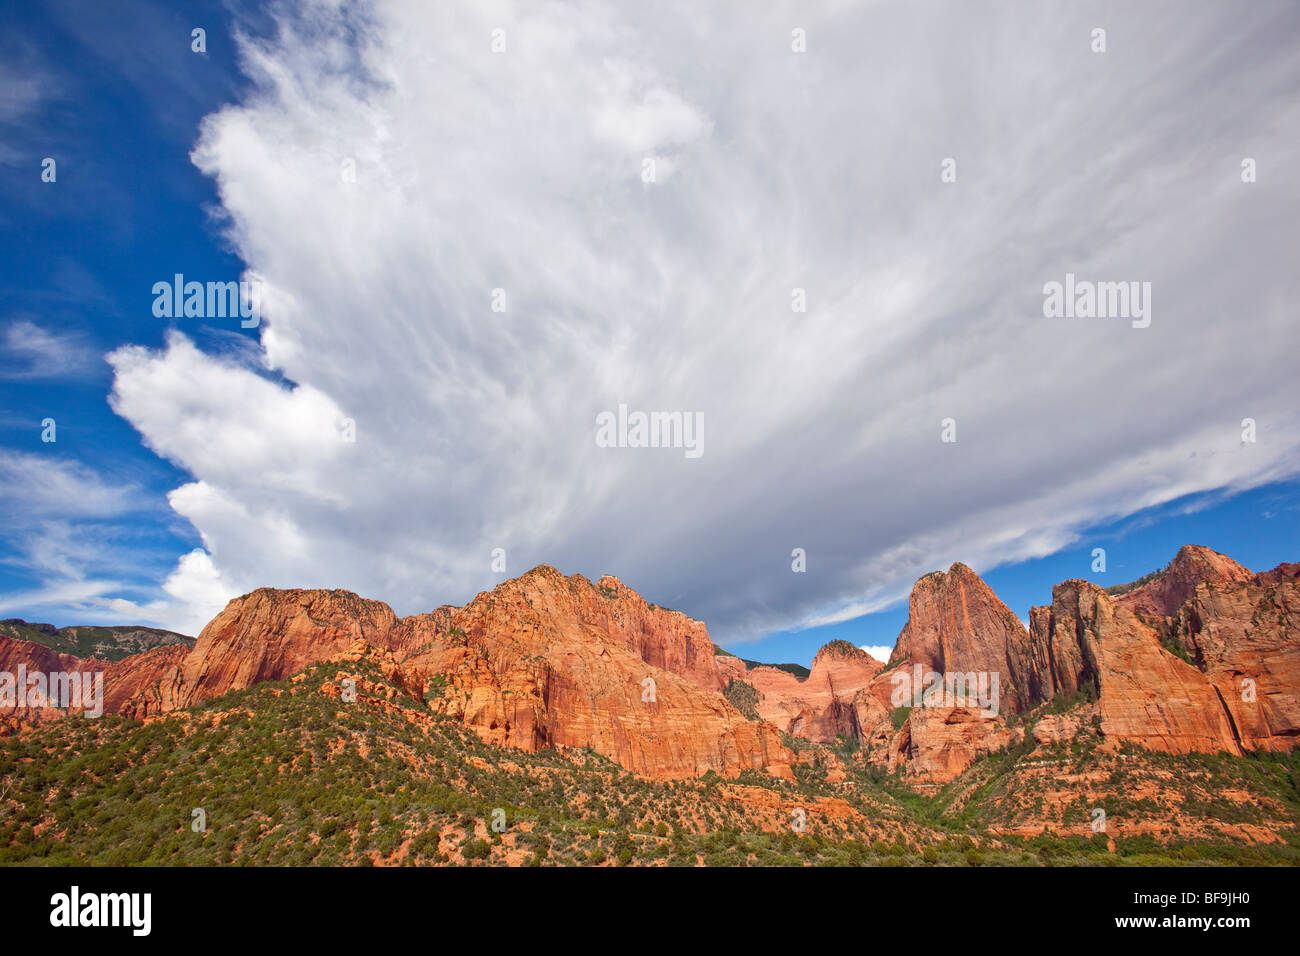 Thunderstorm clouds above cliffs at Kolob Canyons area of Zion National Park, Utah, USA Stock Photo